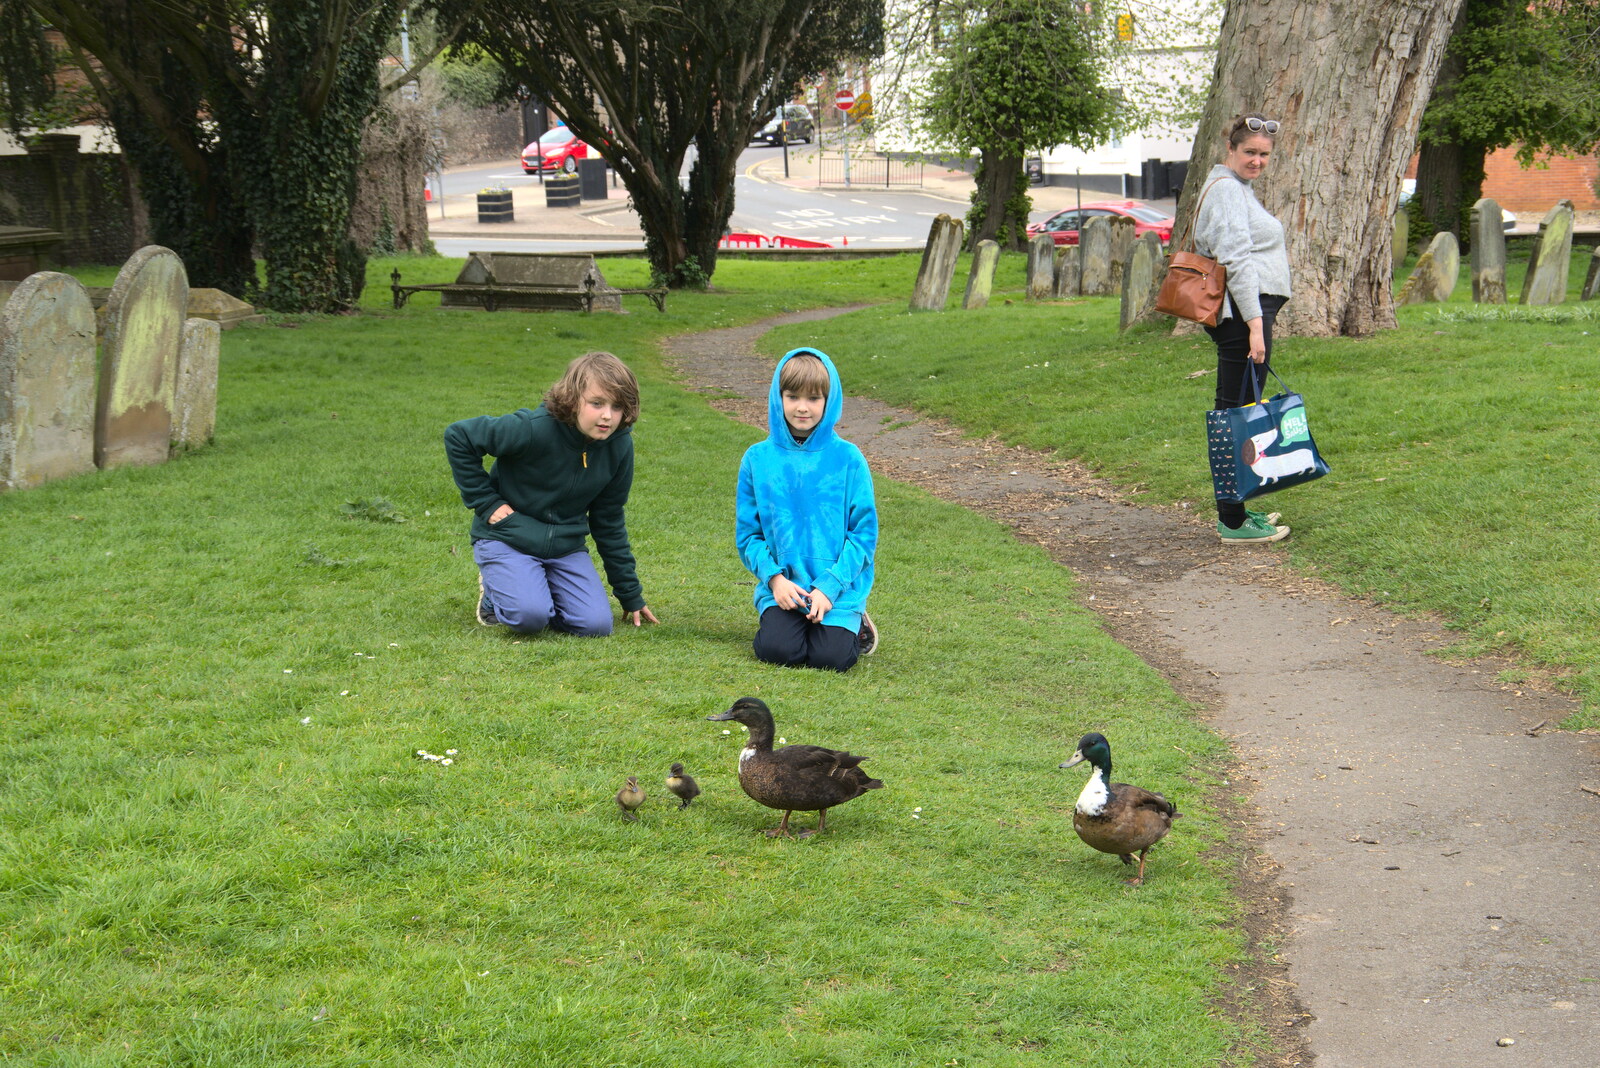 Fred and Harry watch the ducks from A Vaccination Afternoon, Swaffham, Norfolk - 9th May 2021